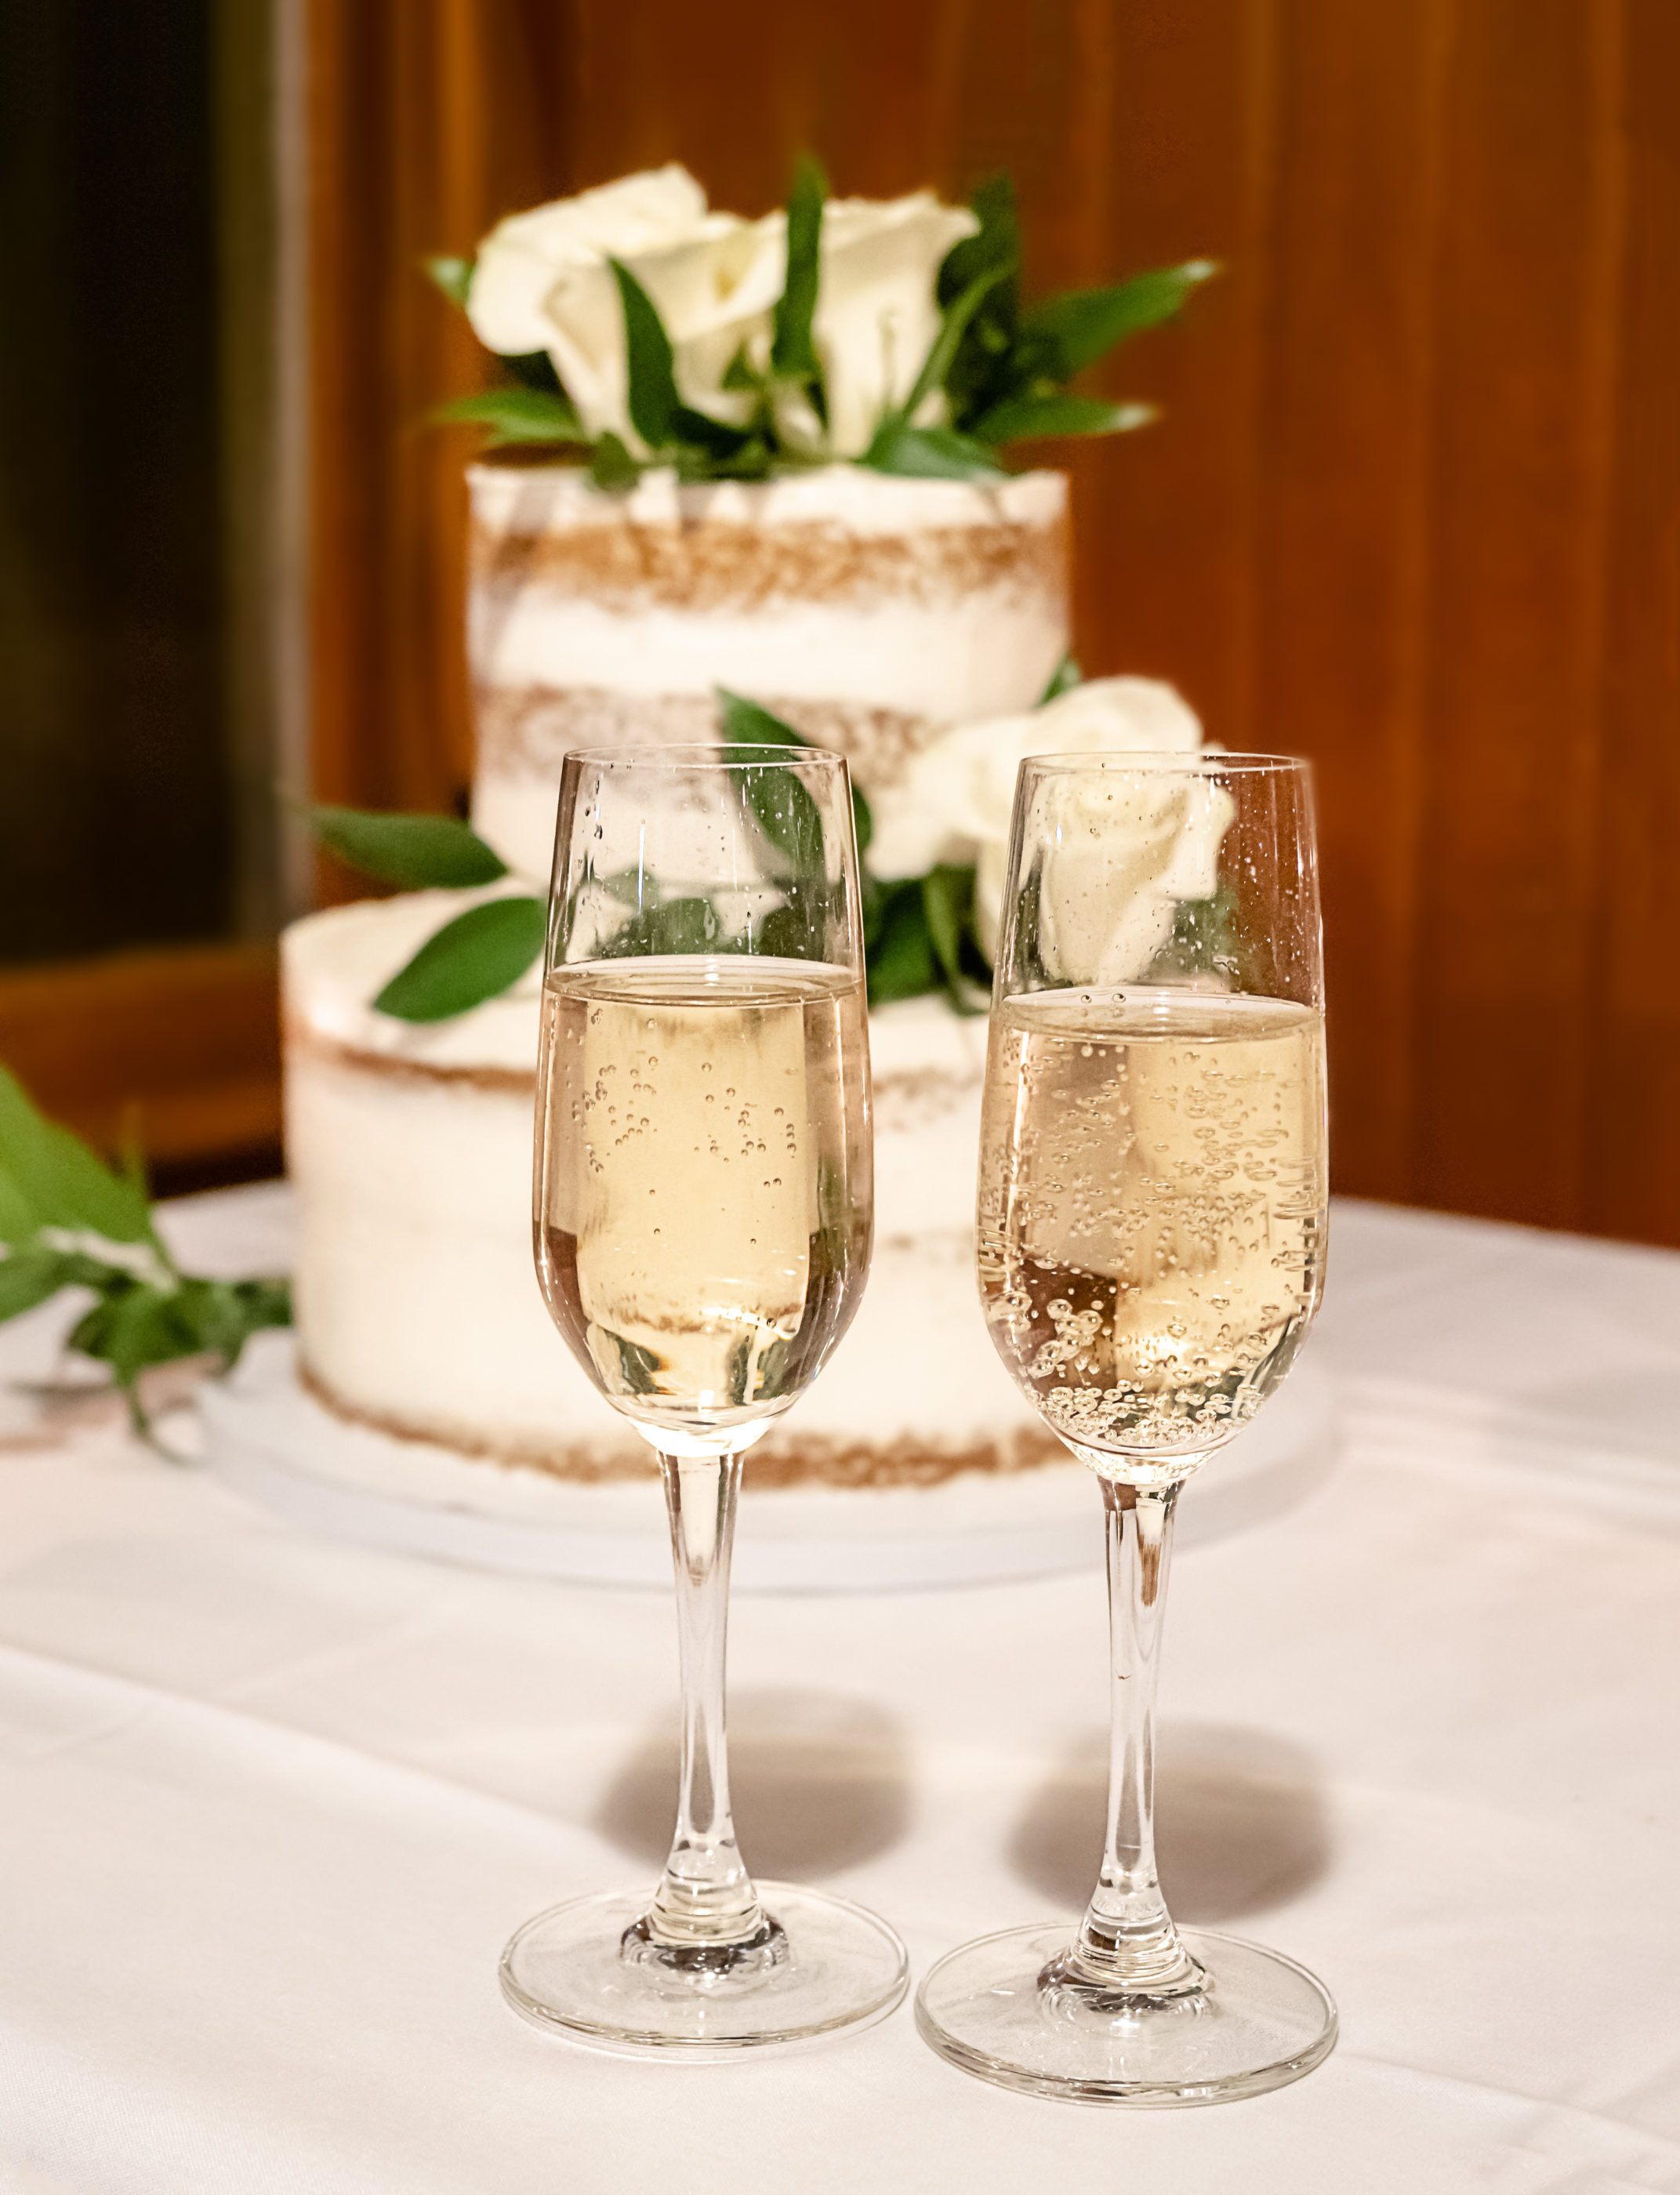 wine glasses for toasting in front of the wedding cake